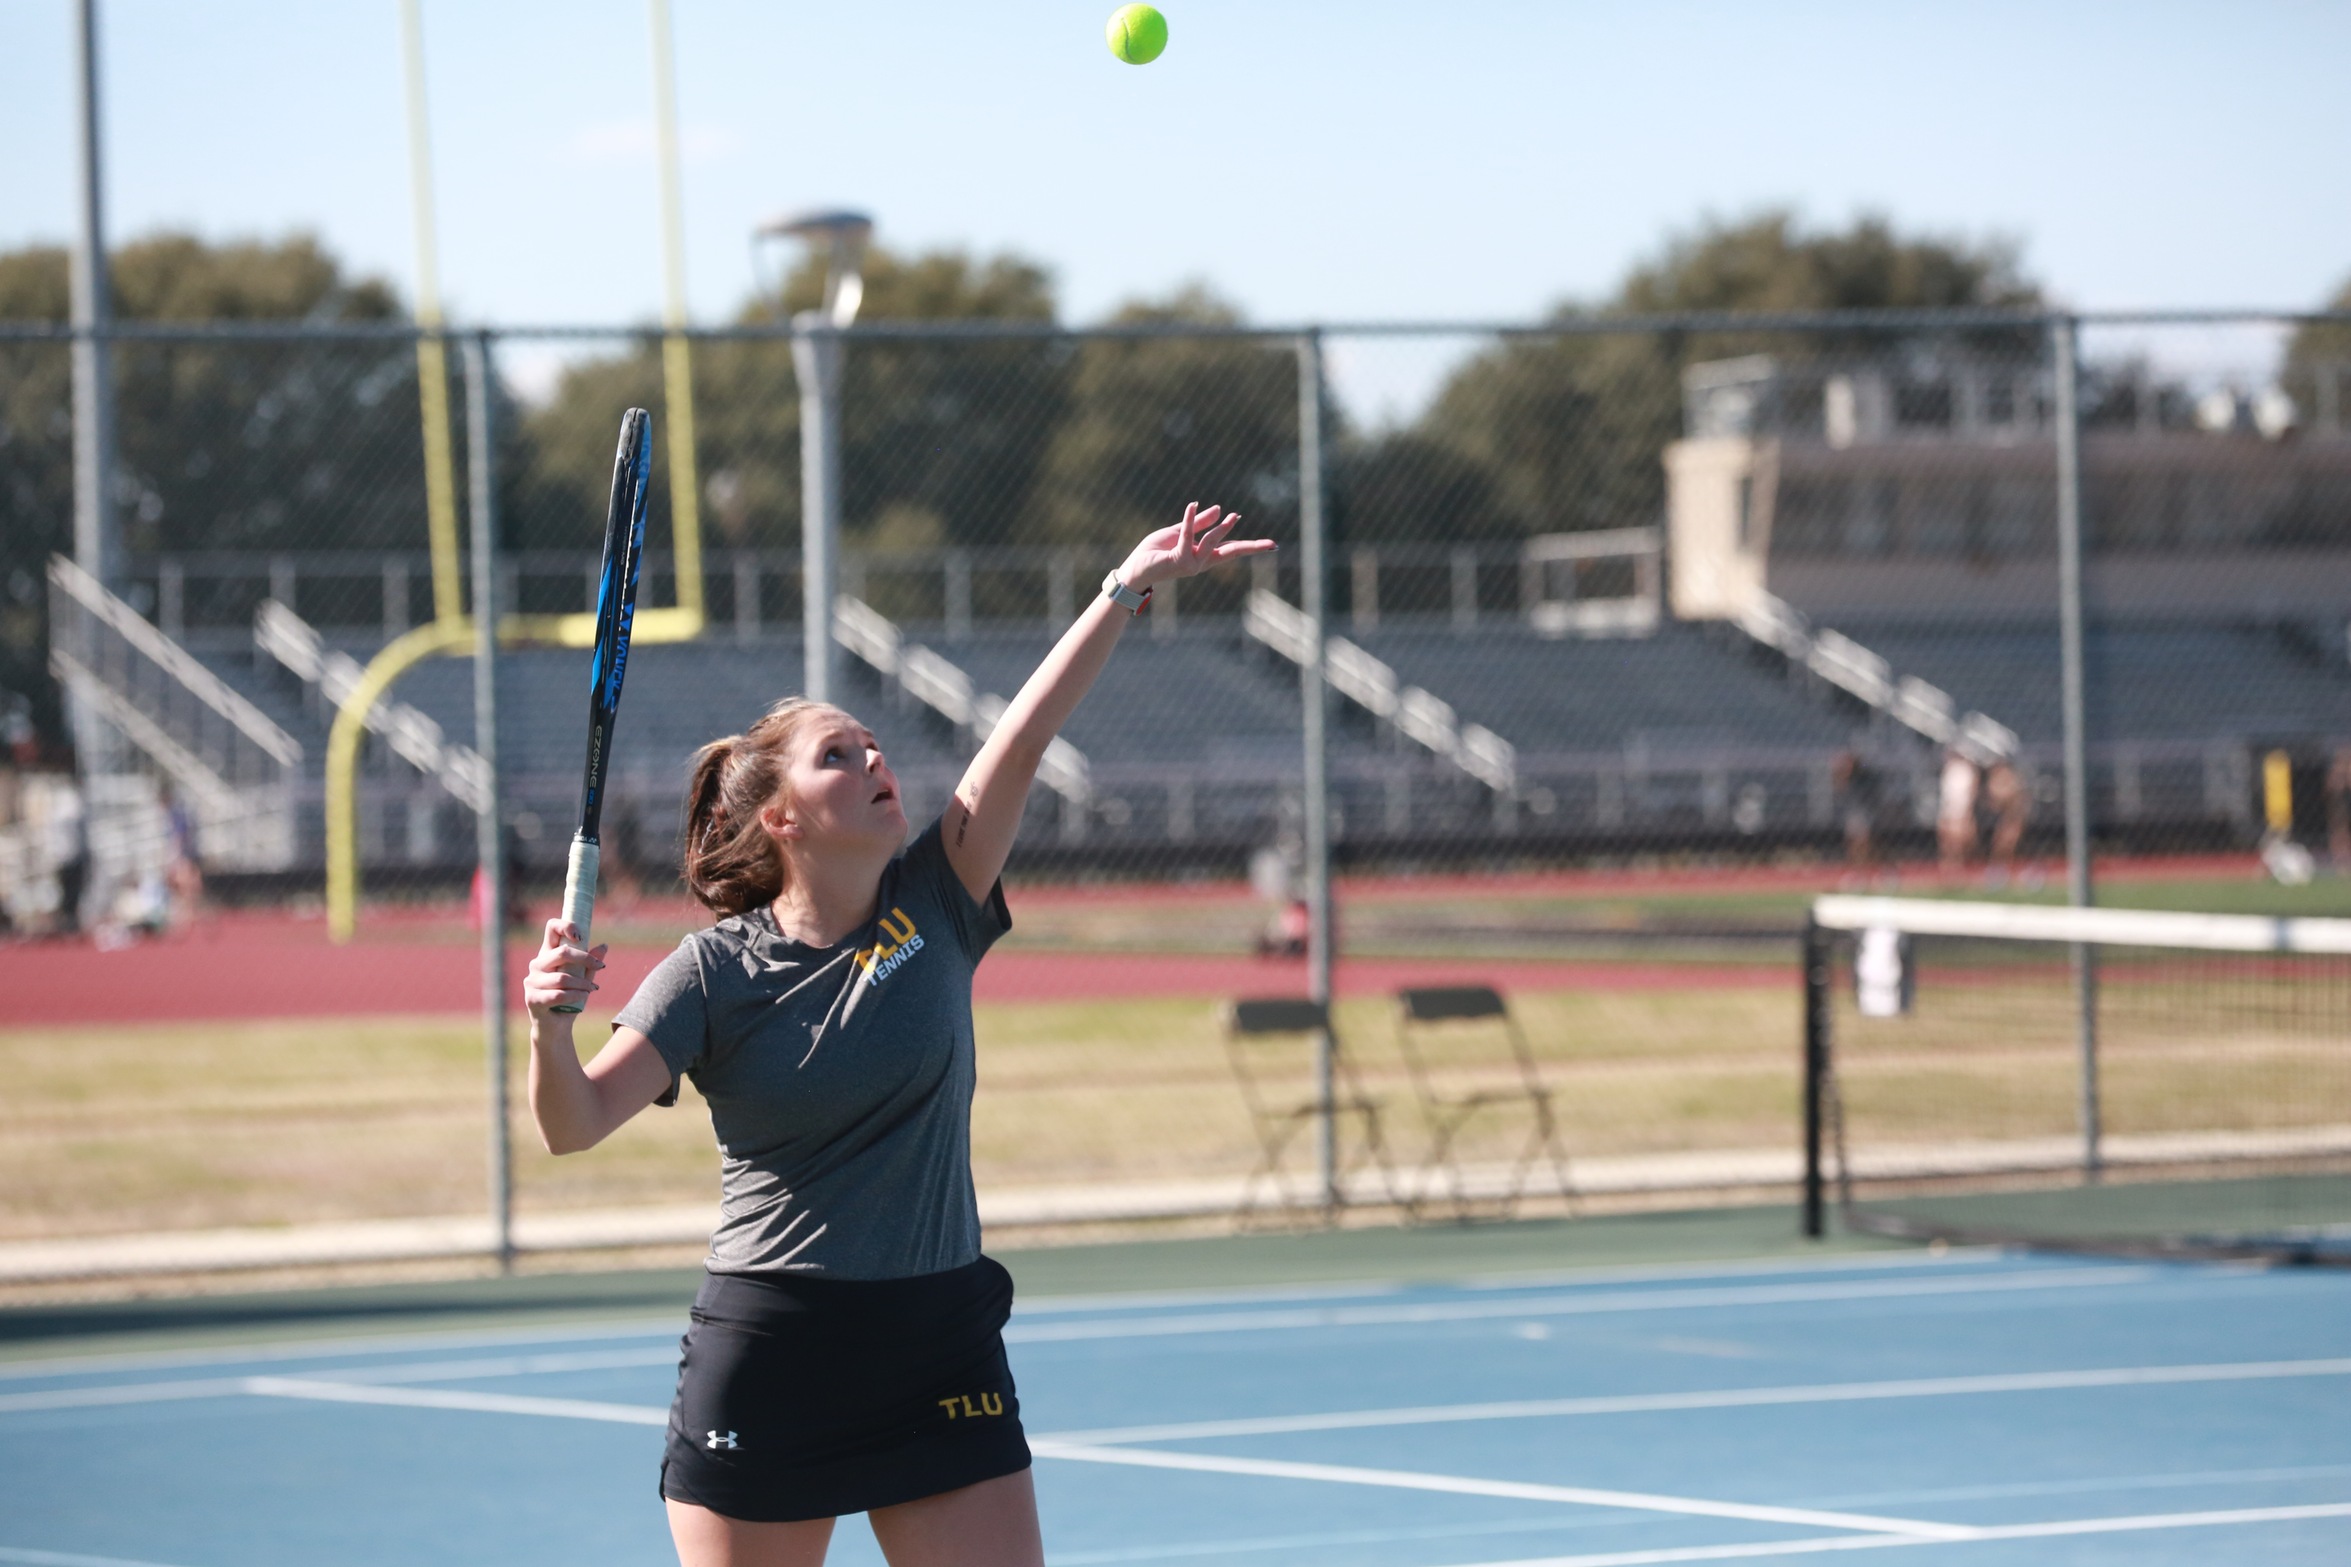 TLU Women's Tennis vs. St. Mary's | 2/10/2022 | All Photos By Bryce Hayes